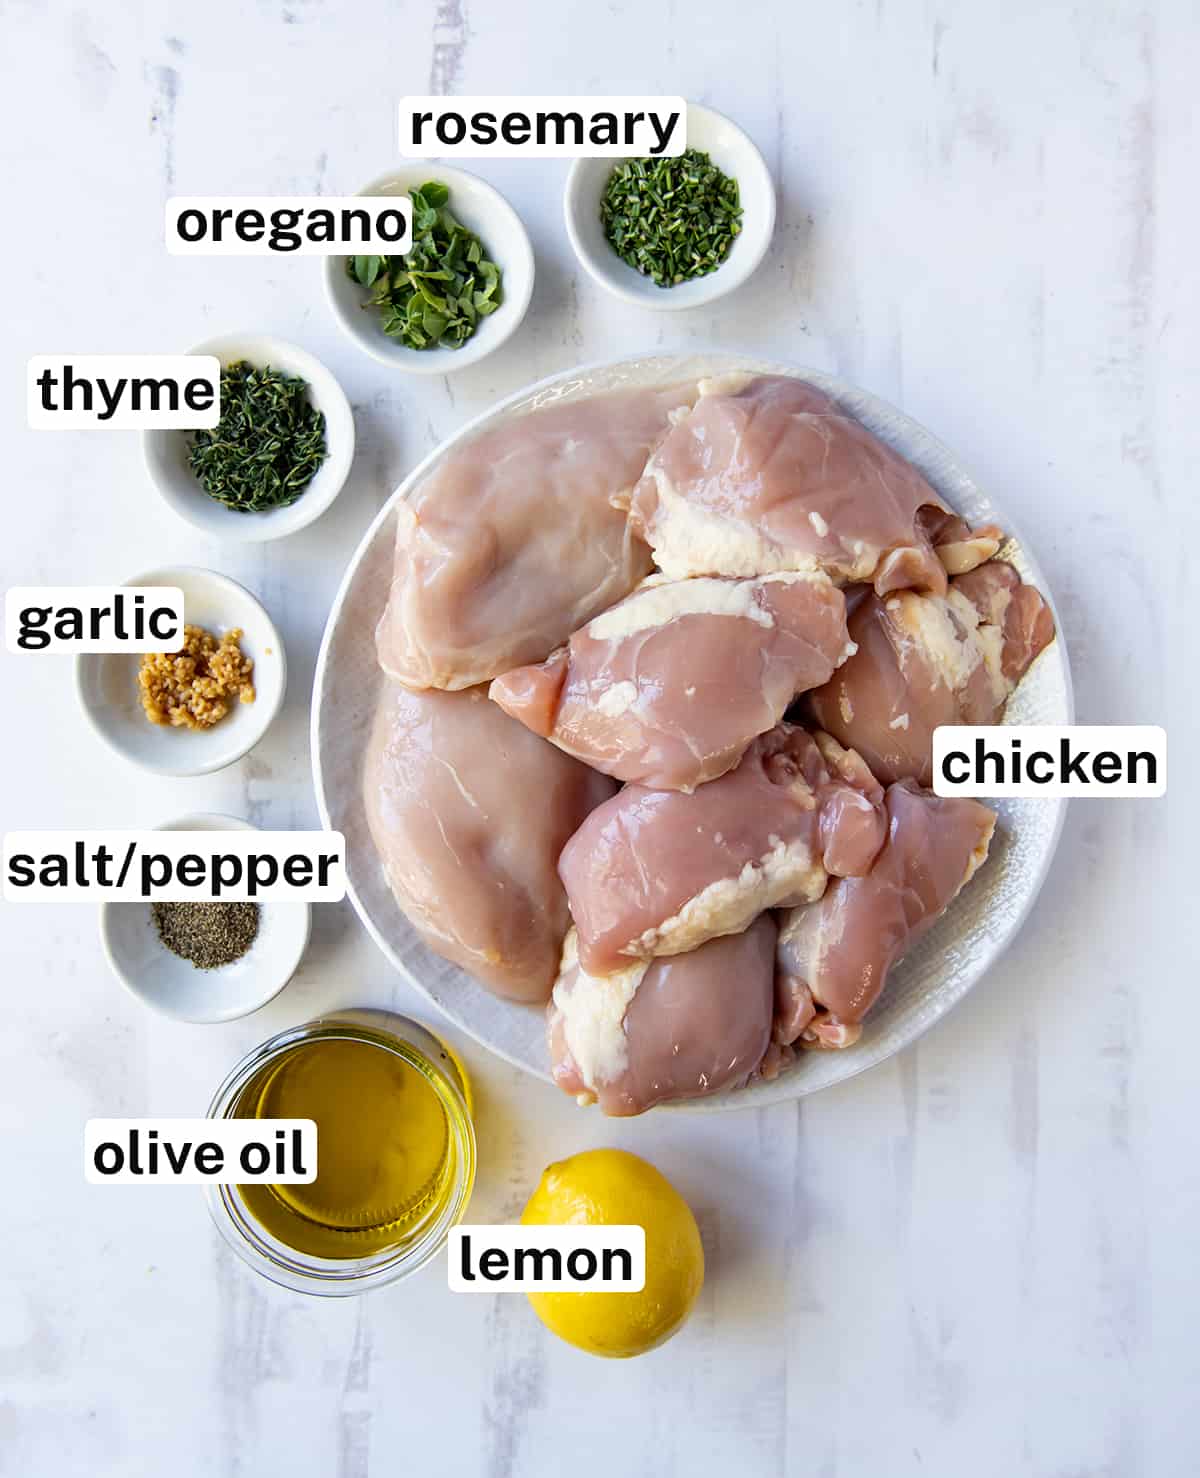 The ingredients for making Grilled Greek Chicken with overlay text.